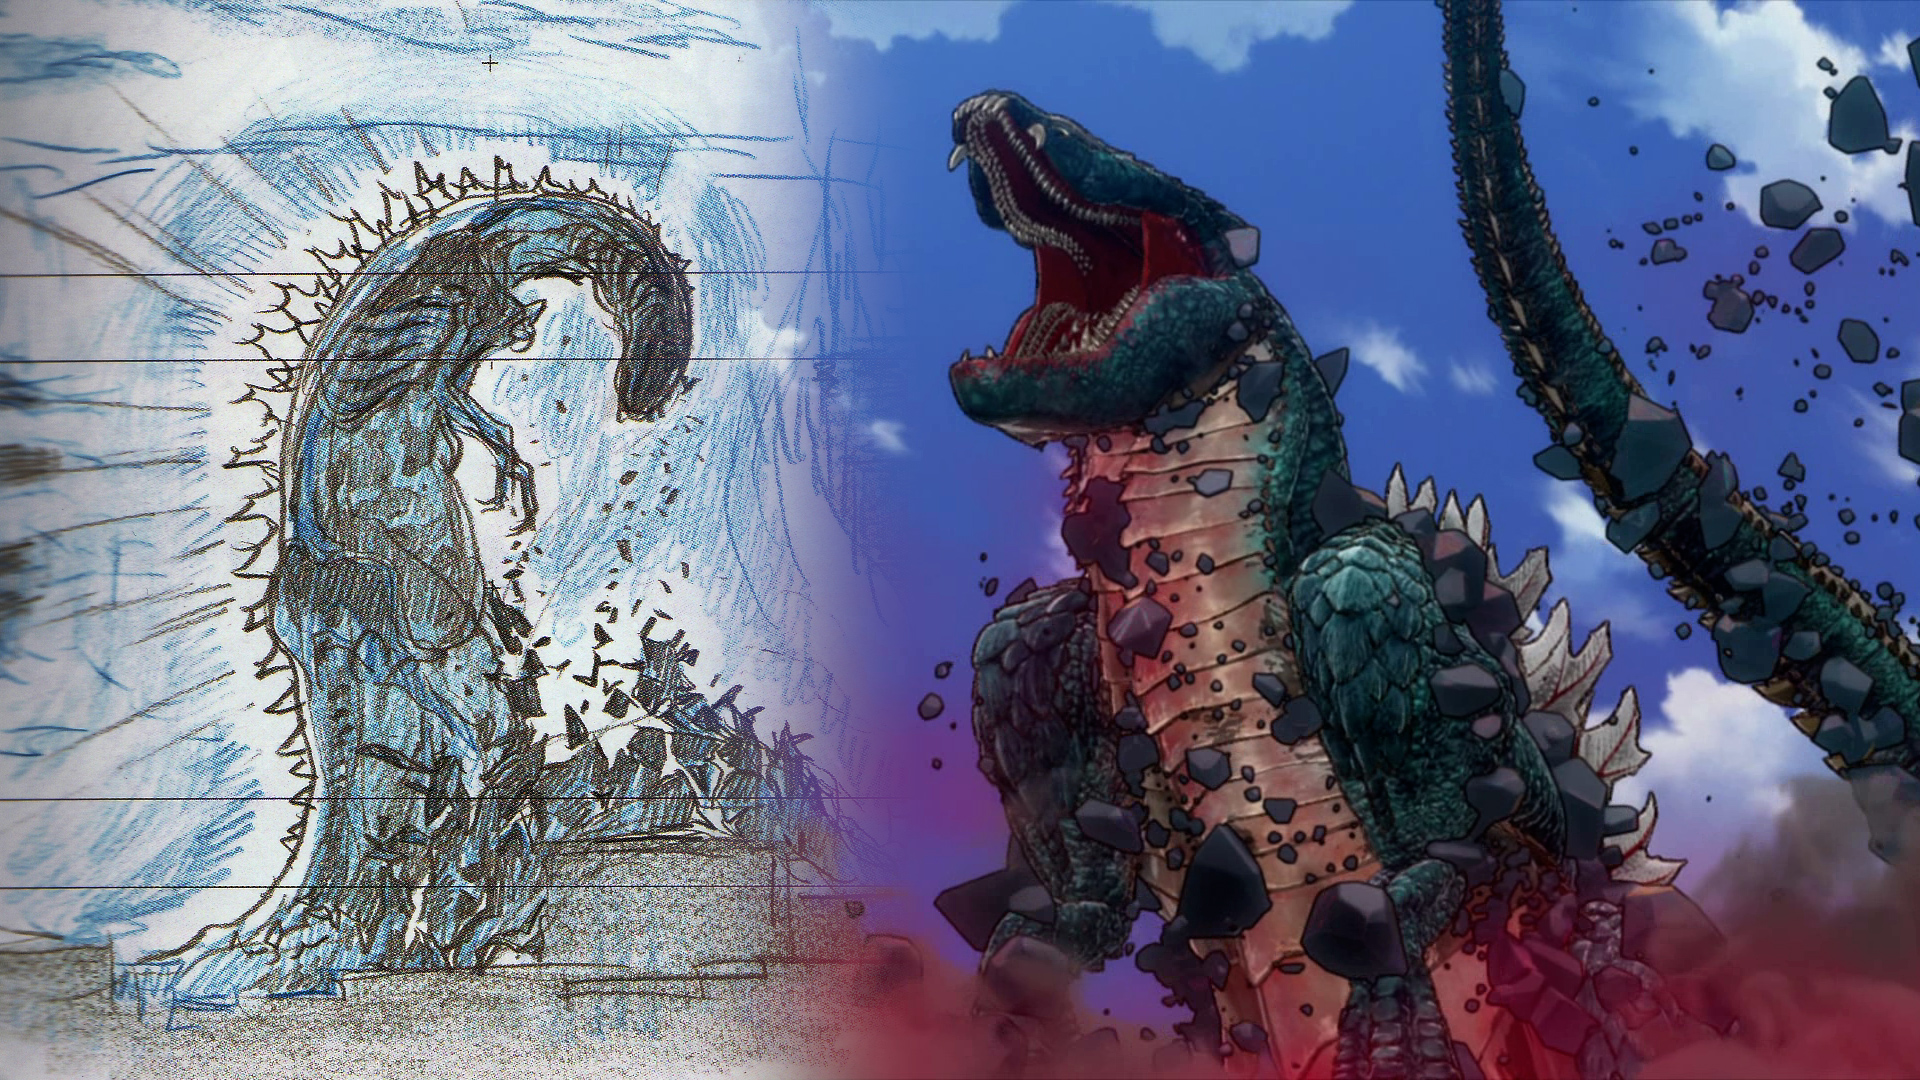 Monstrosities on think its awesome that godzilla singular point used scrapped ideas from shin godzilla photos from the uping part of the lost amp unmade video ãããsp ããã shingodzilla httpstcoyksatkjcfn